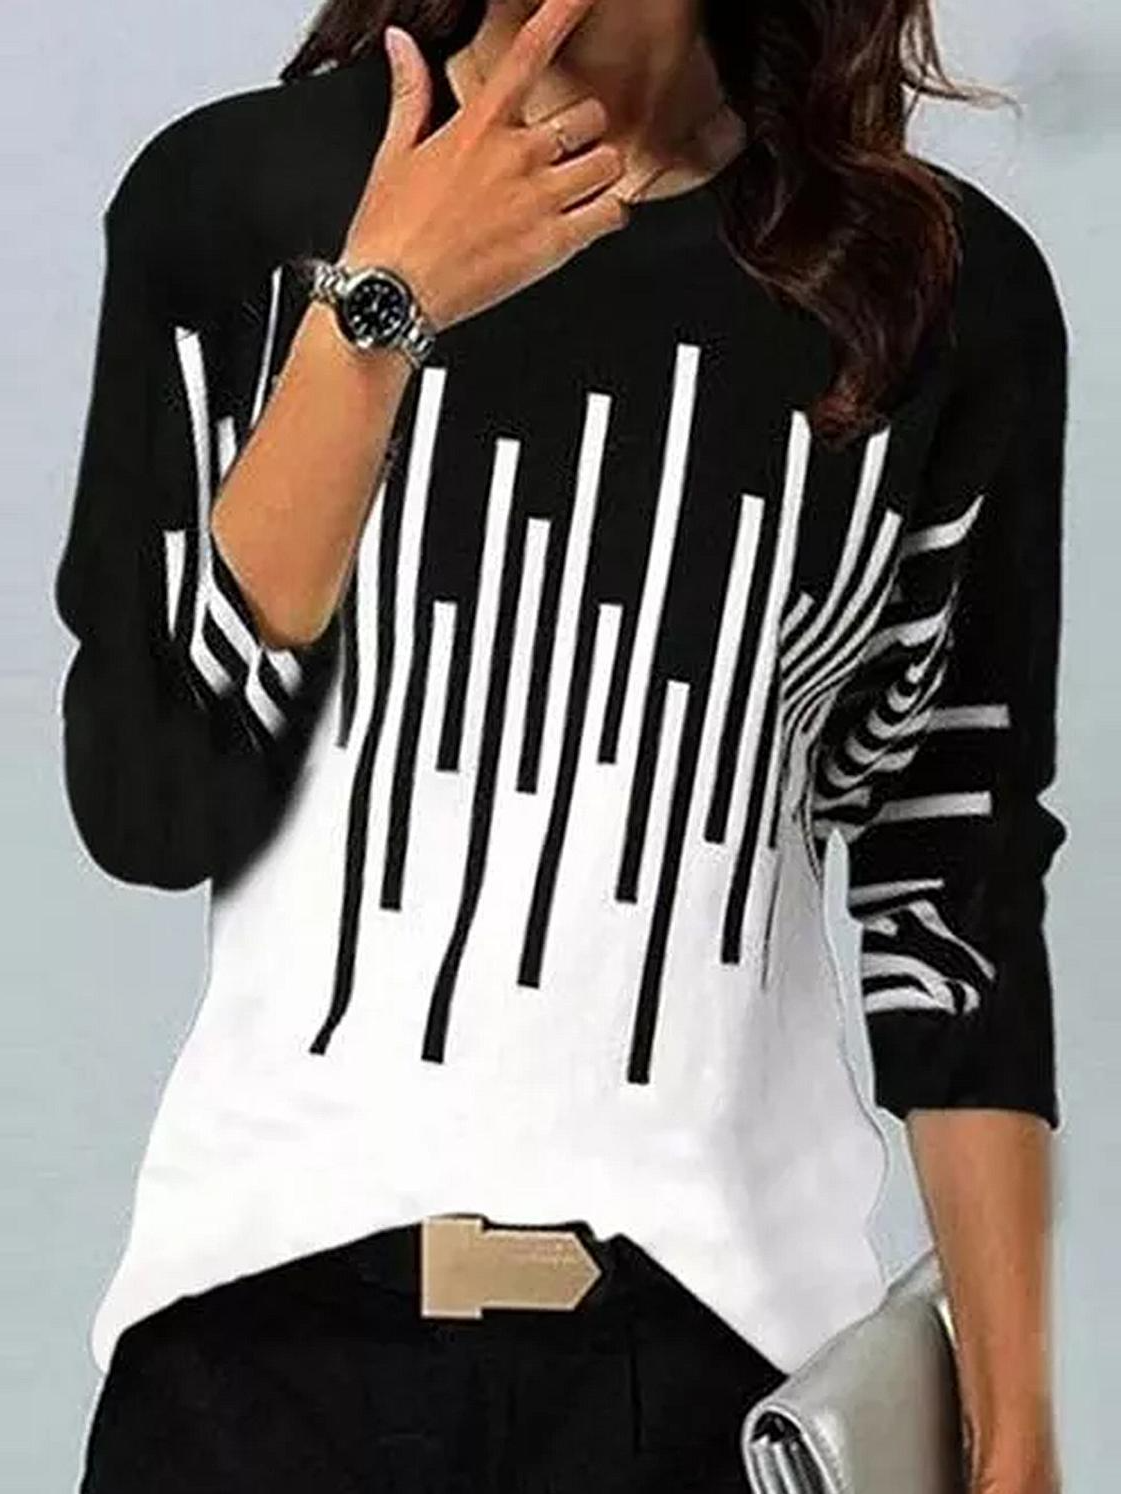 Daily Casual Geometric Cotton Blends Crew Neck Long Sleeve T-shirt